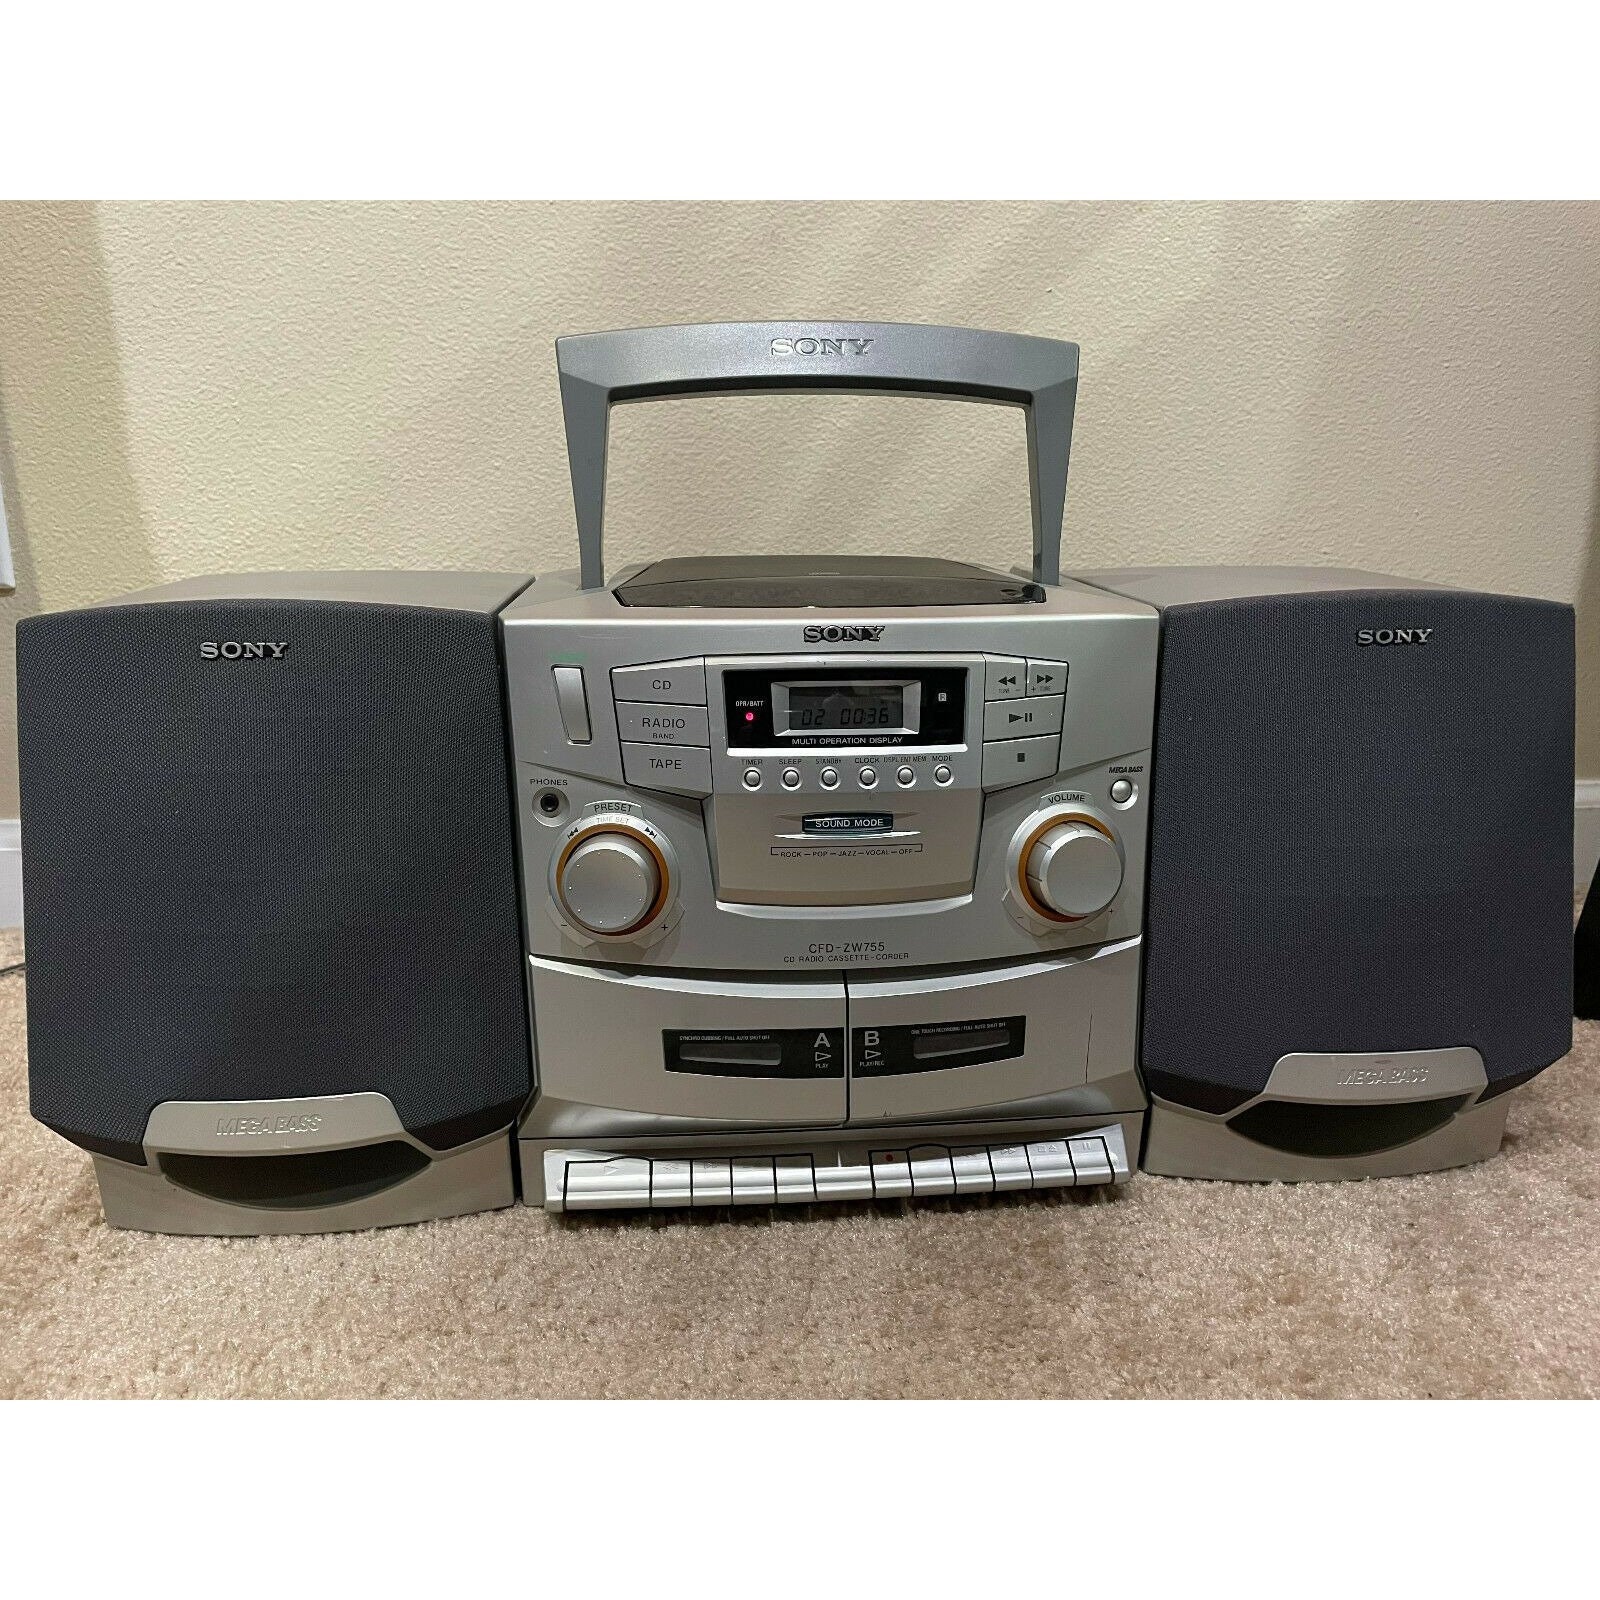 Sony Cfd-zw755 Stereo System Boombox Cd/dual Cassette/ AM/FM - Etsy  Australia